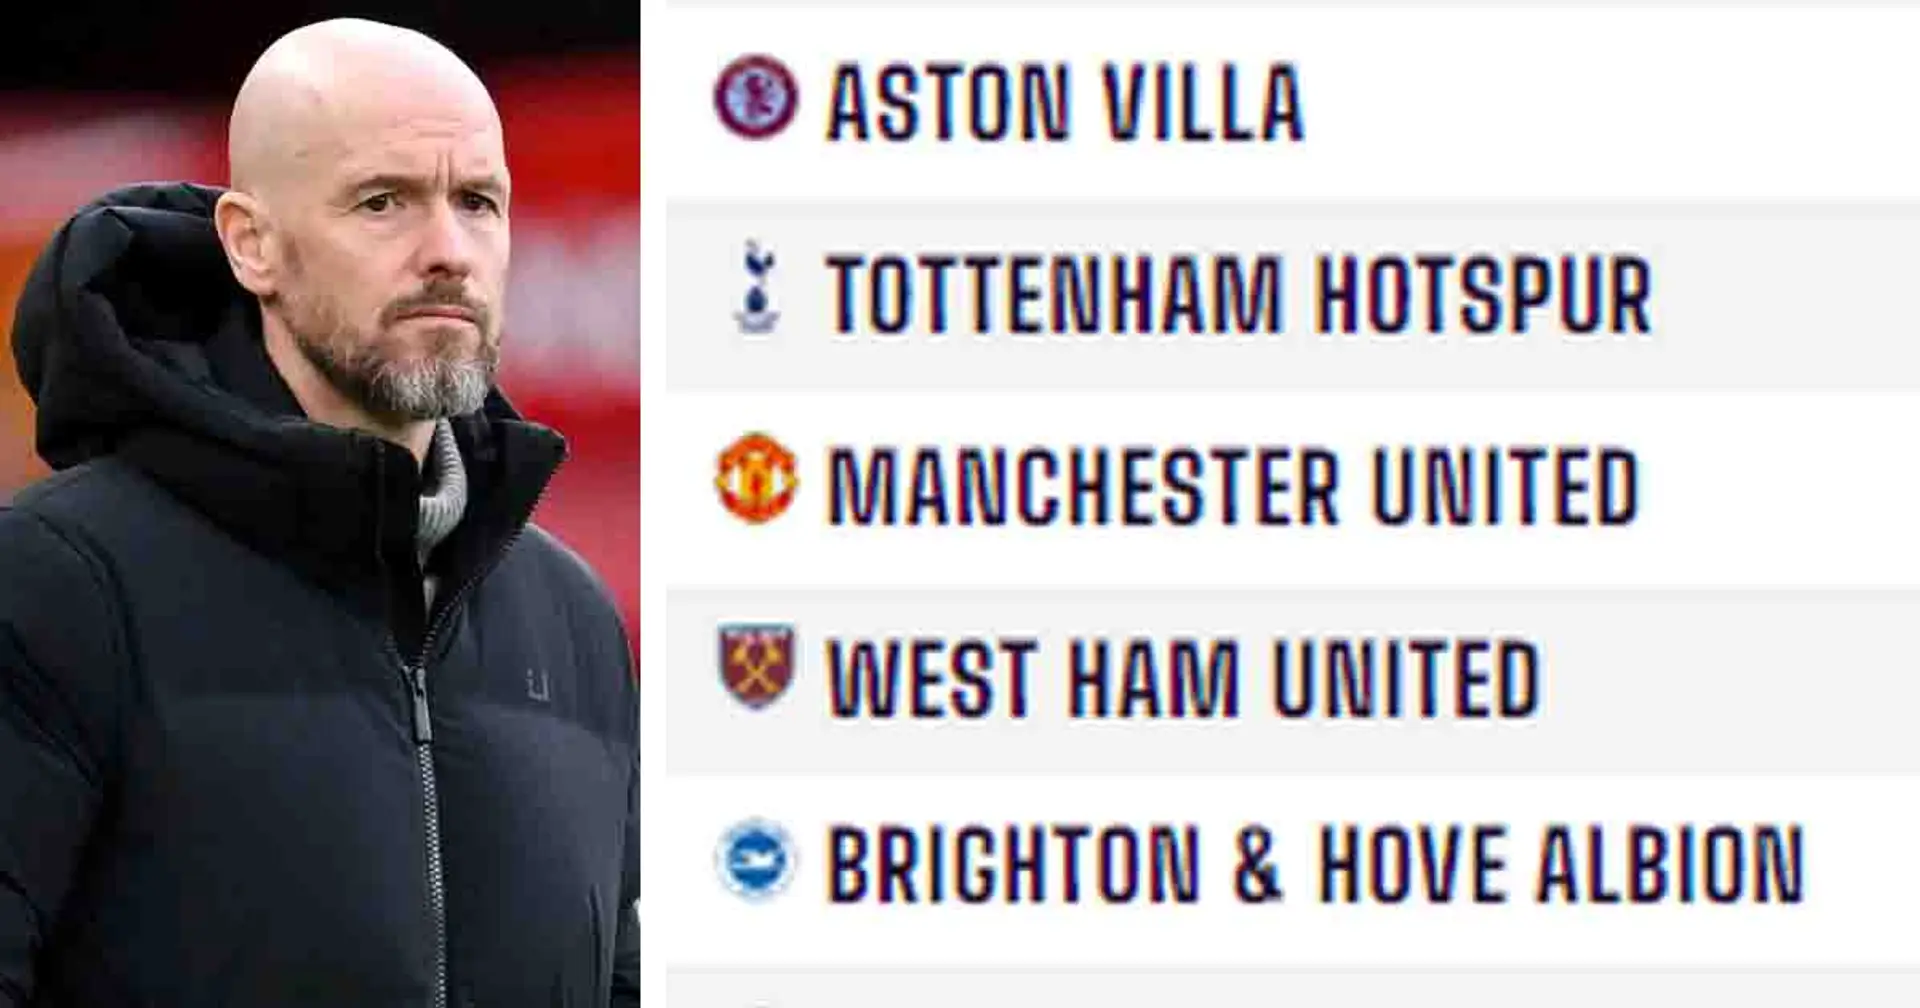 Lower than Aston Villa: Supercomputer rates Man United's chances of Premier League top-4 finish with back-to-back wins